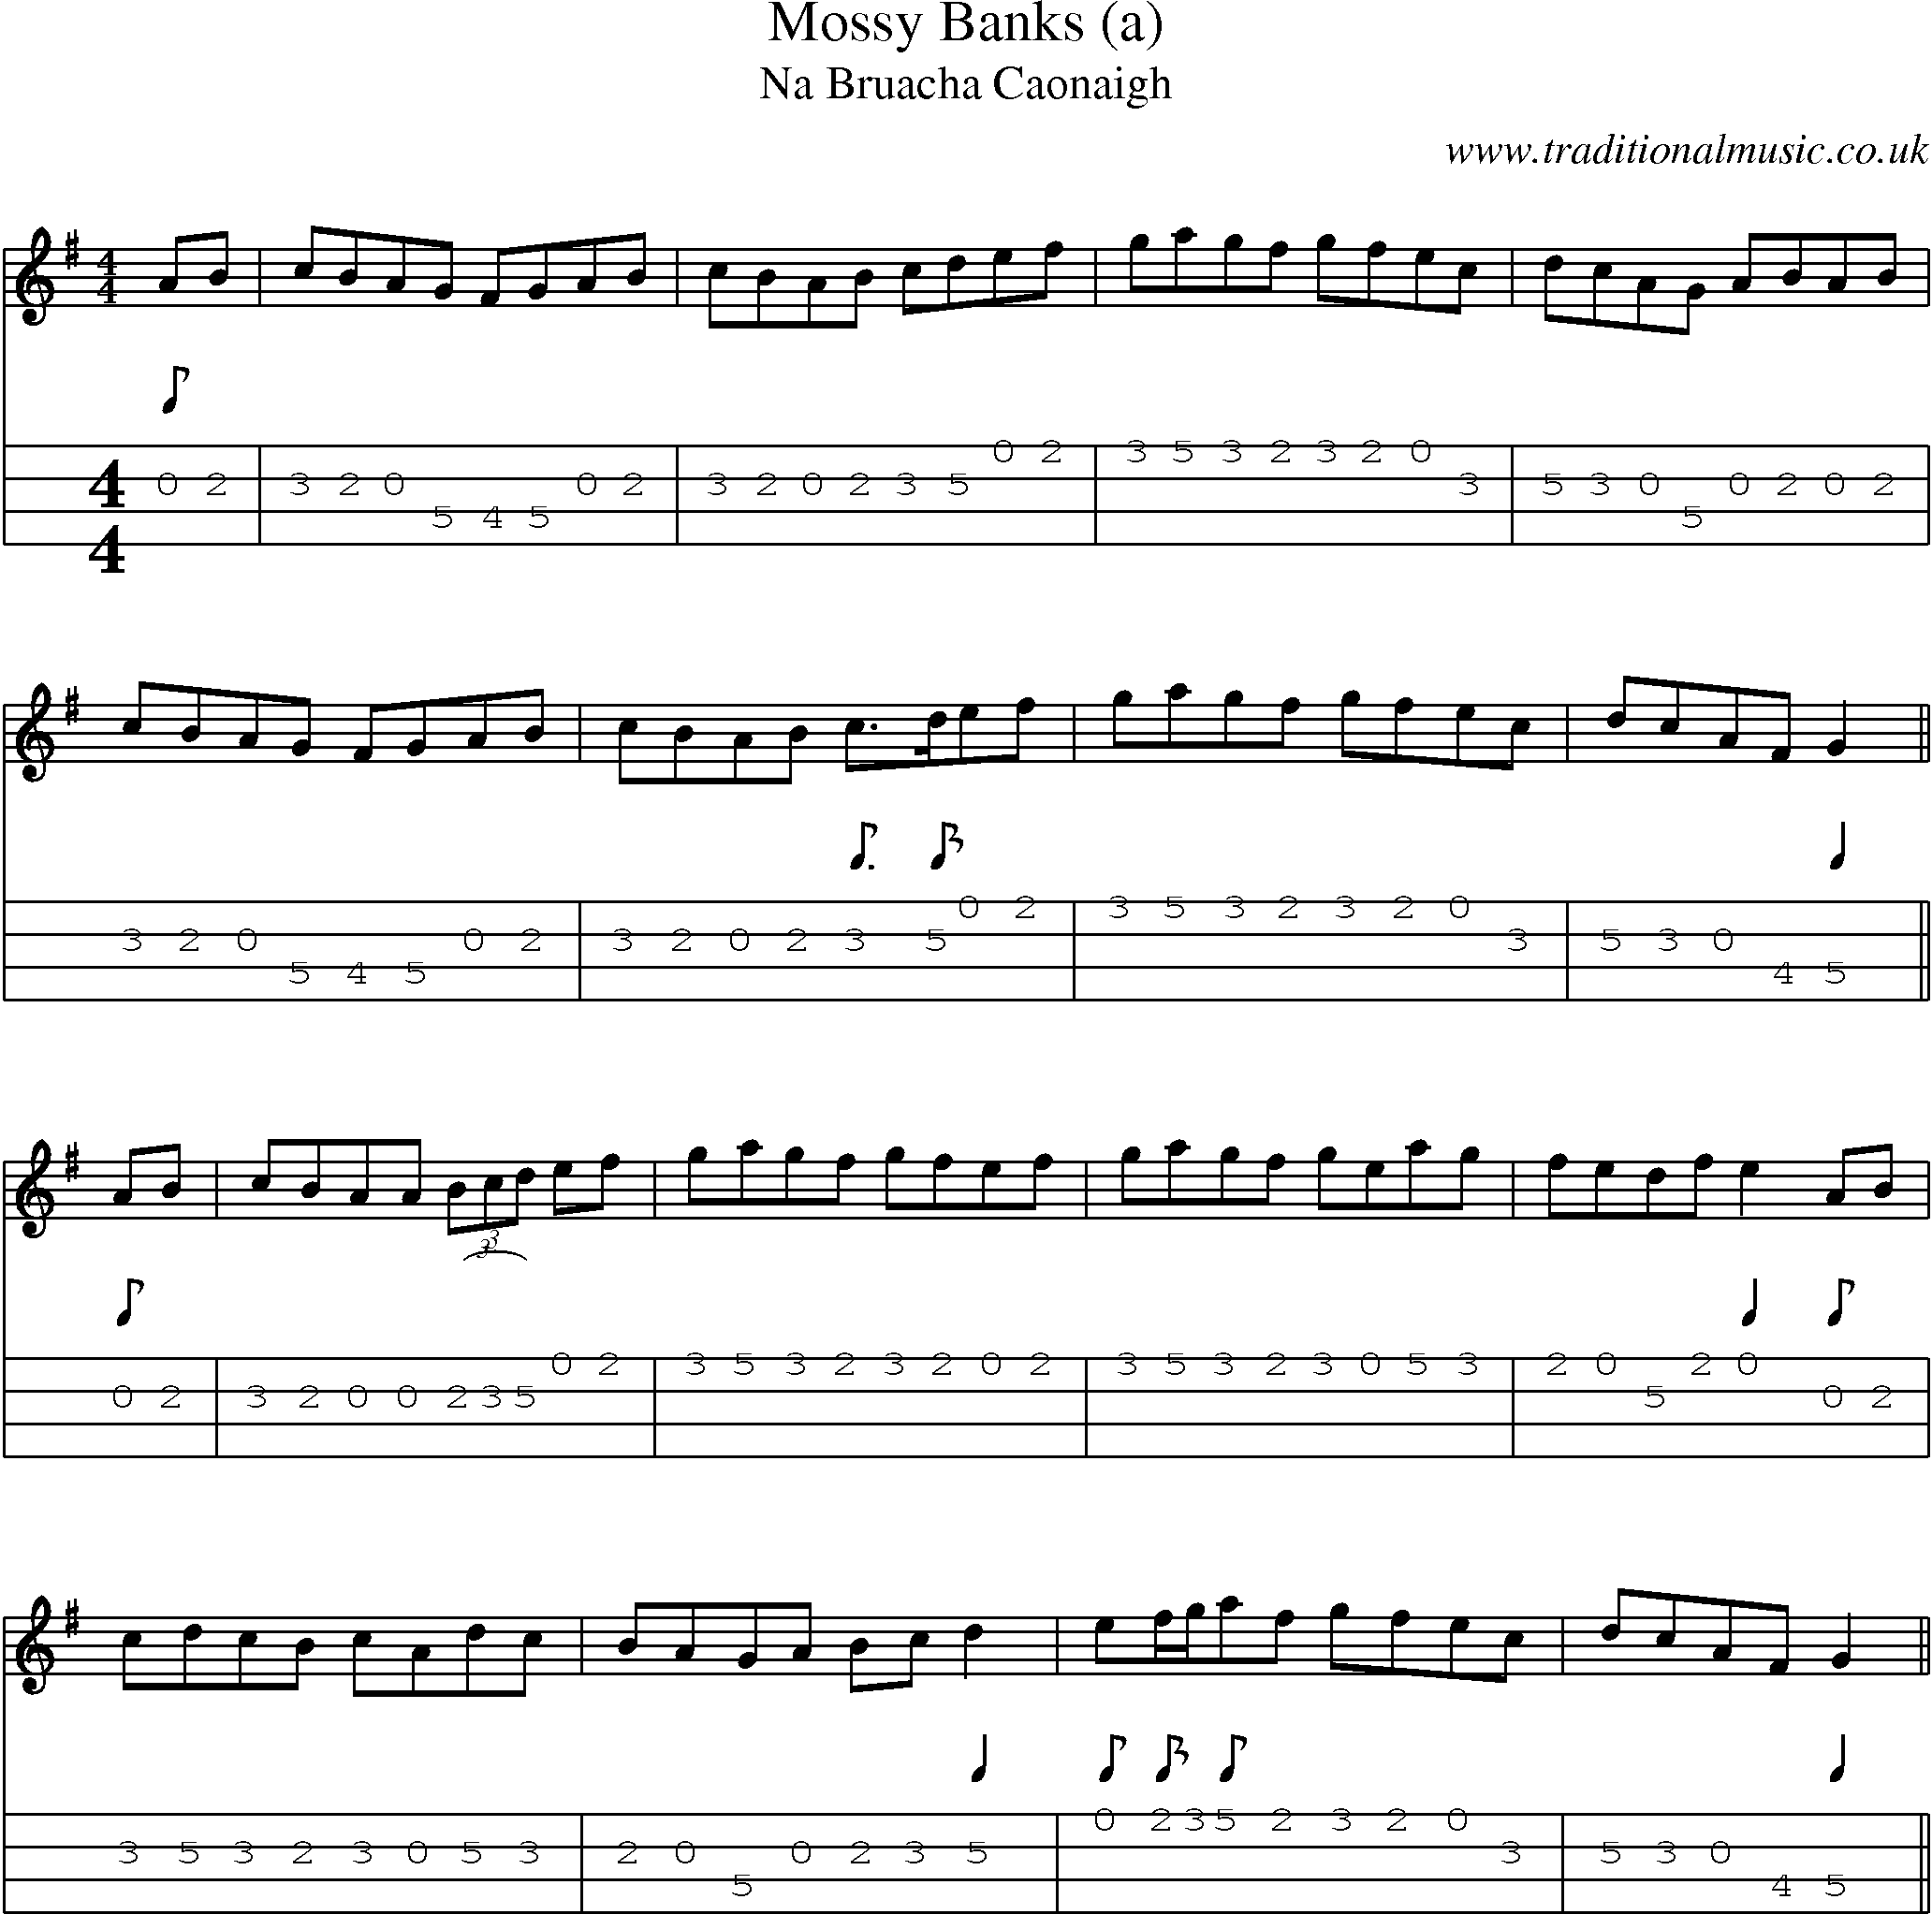 Music Score and Mandolin Tabs for Mossy Banks (a)